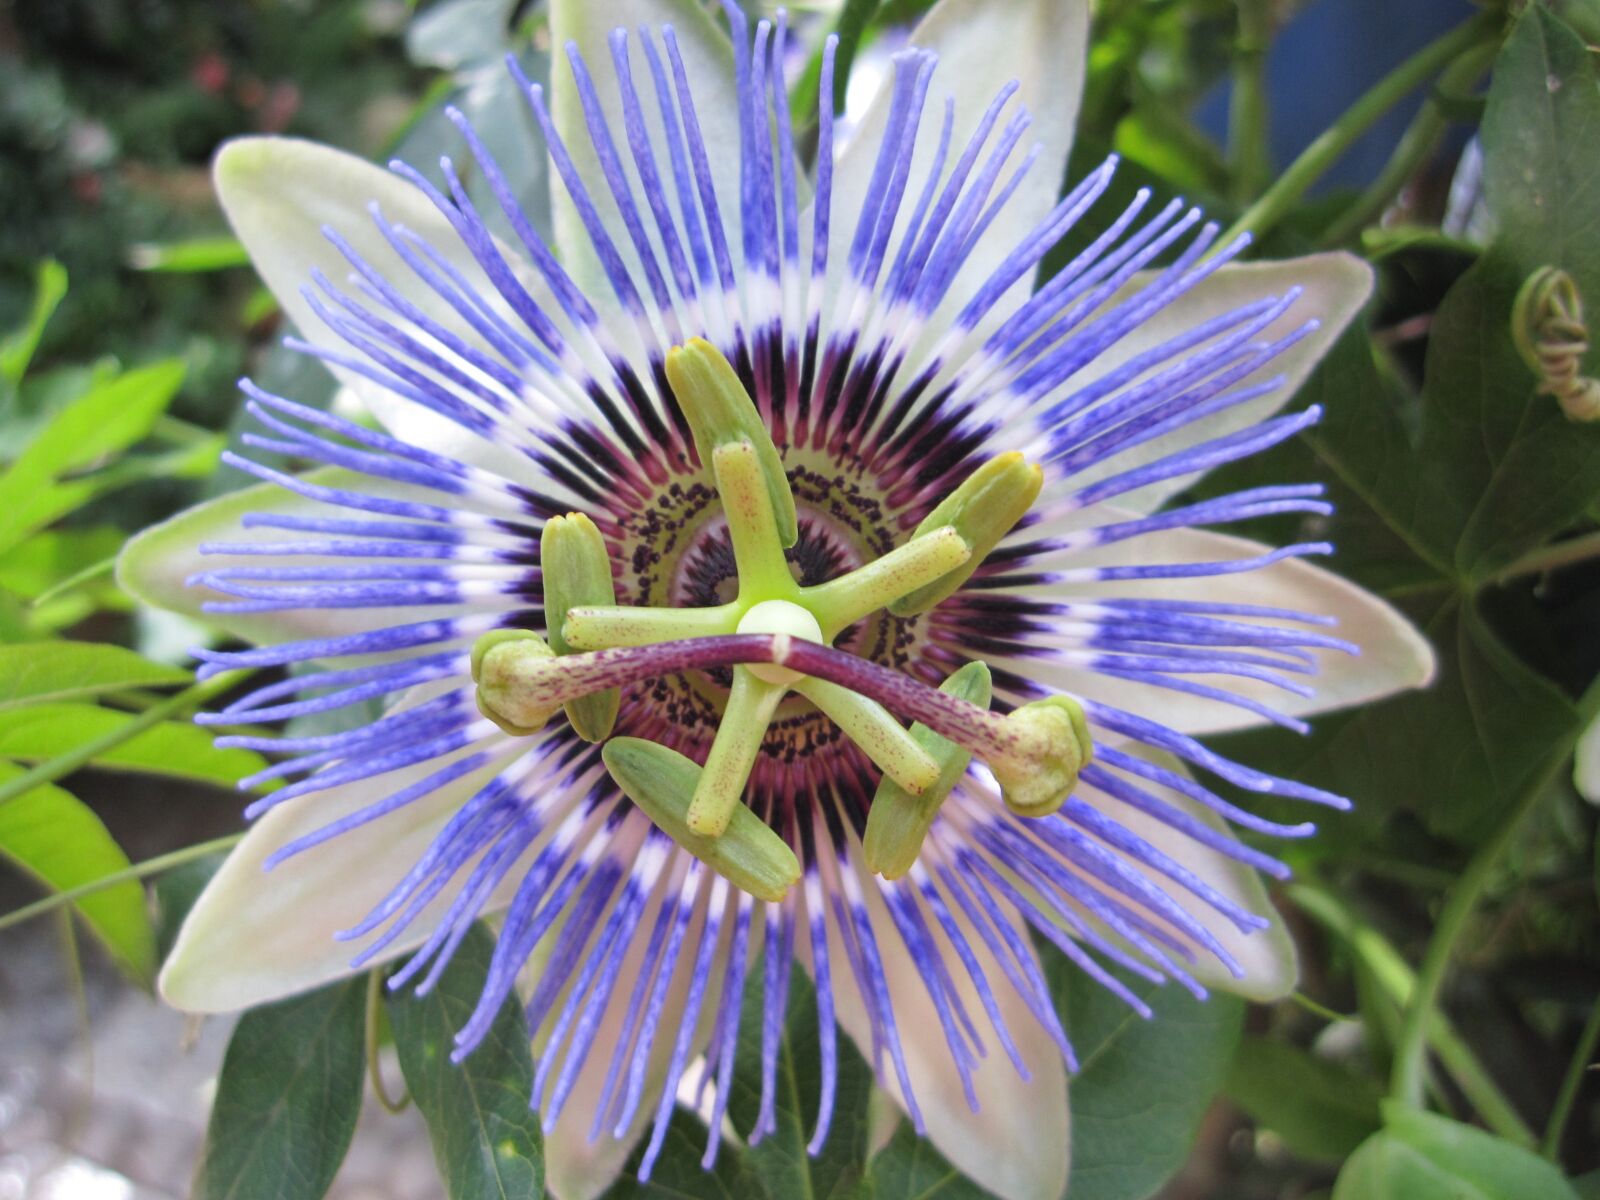 Canon PowerShot SD960 IS (Digital IXUS 110 IS / IXY Digital 510 IS) sample photo. Passion flower, blossom, bloom photography